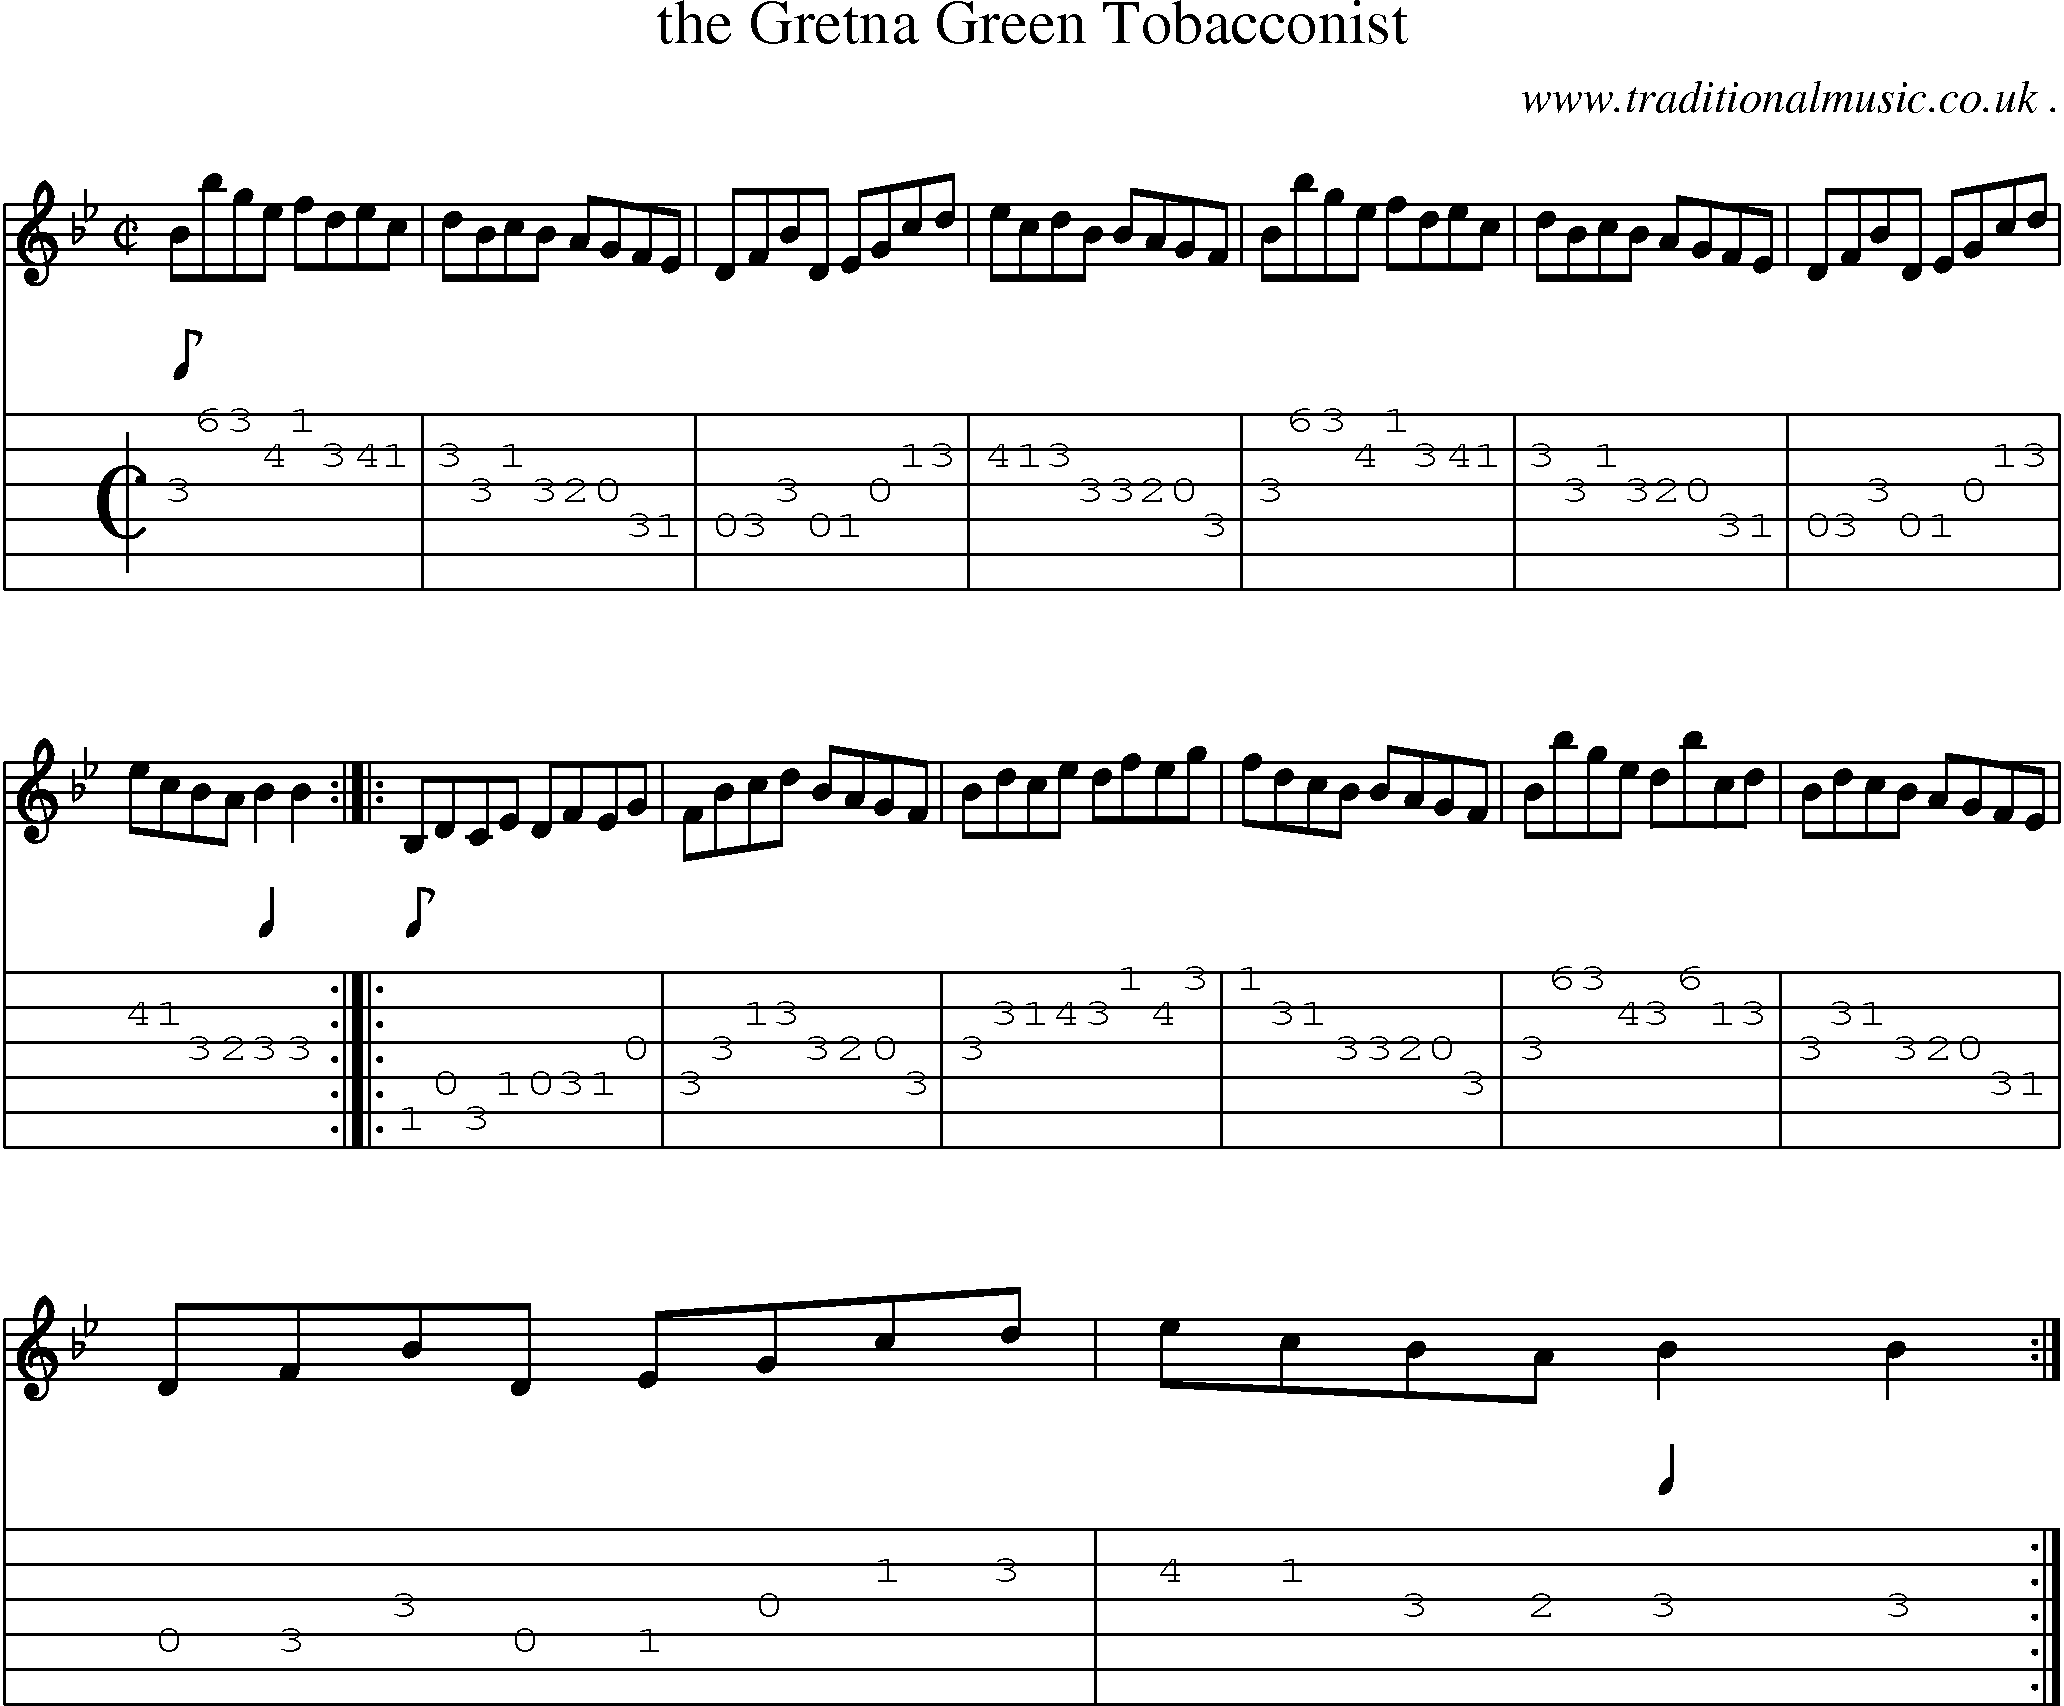 Sheet-Music and Guitar Tabs for The Gretna Green Tobacconist